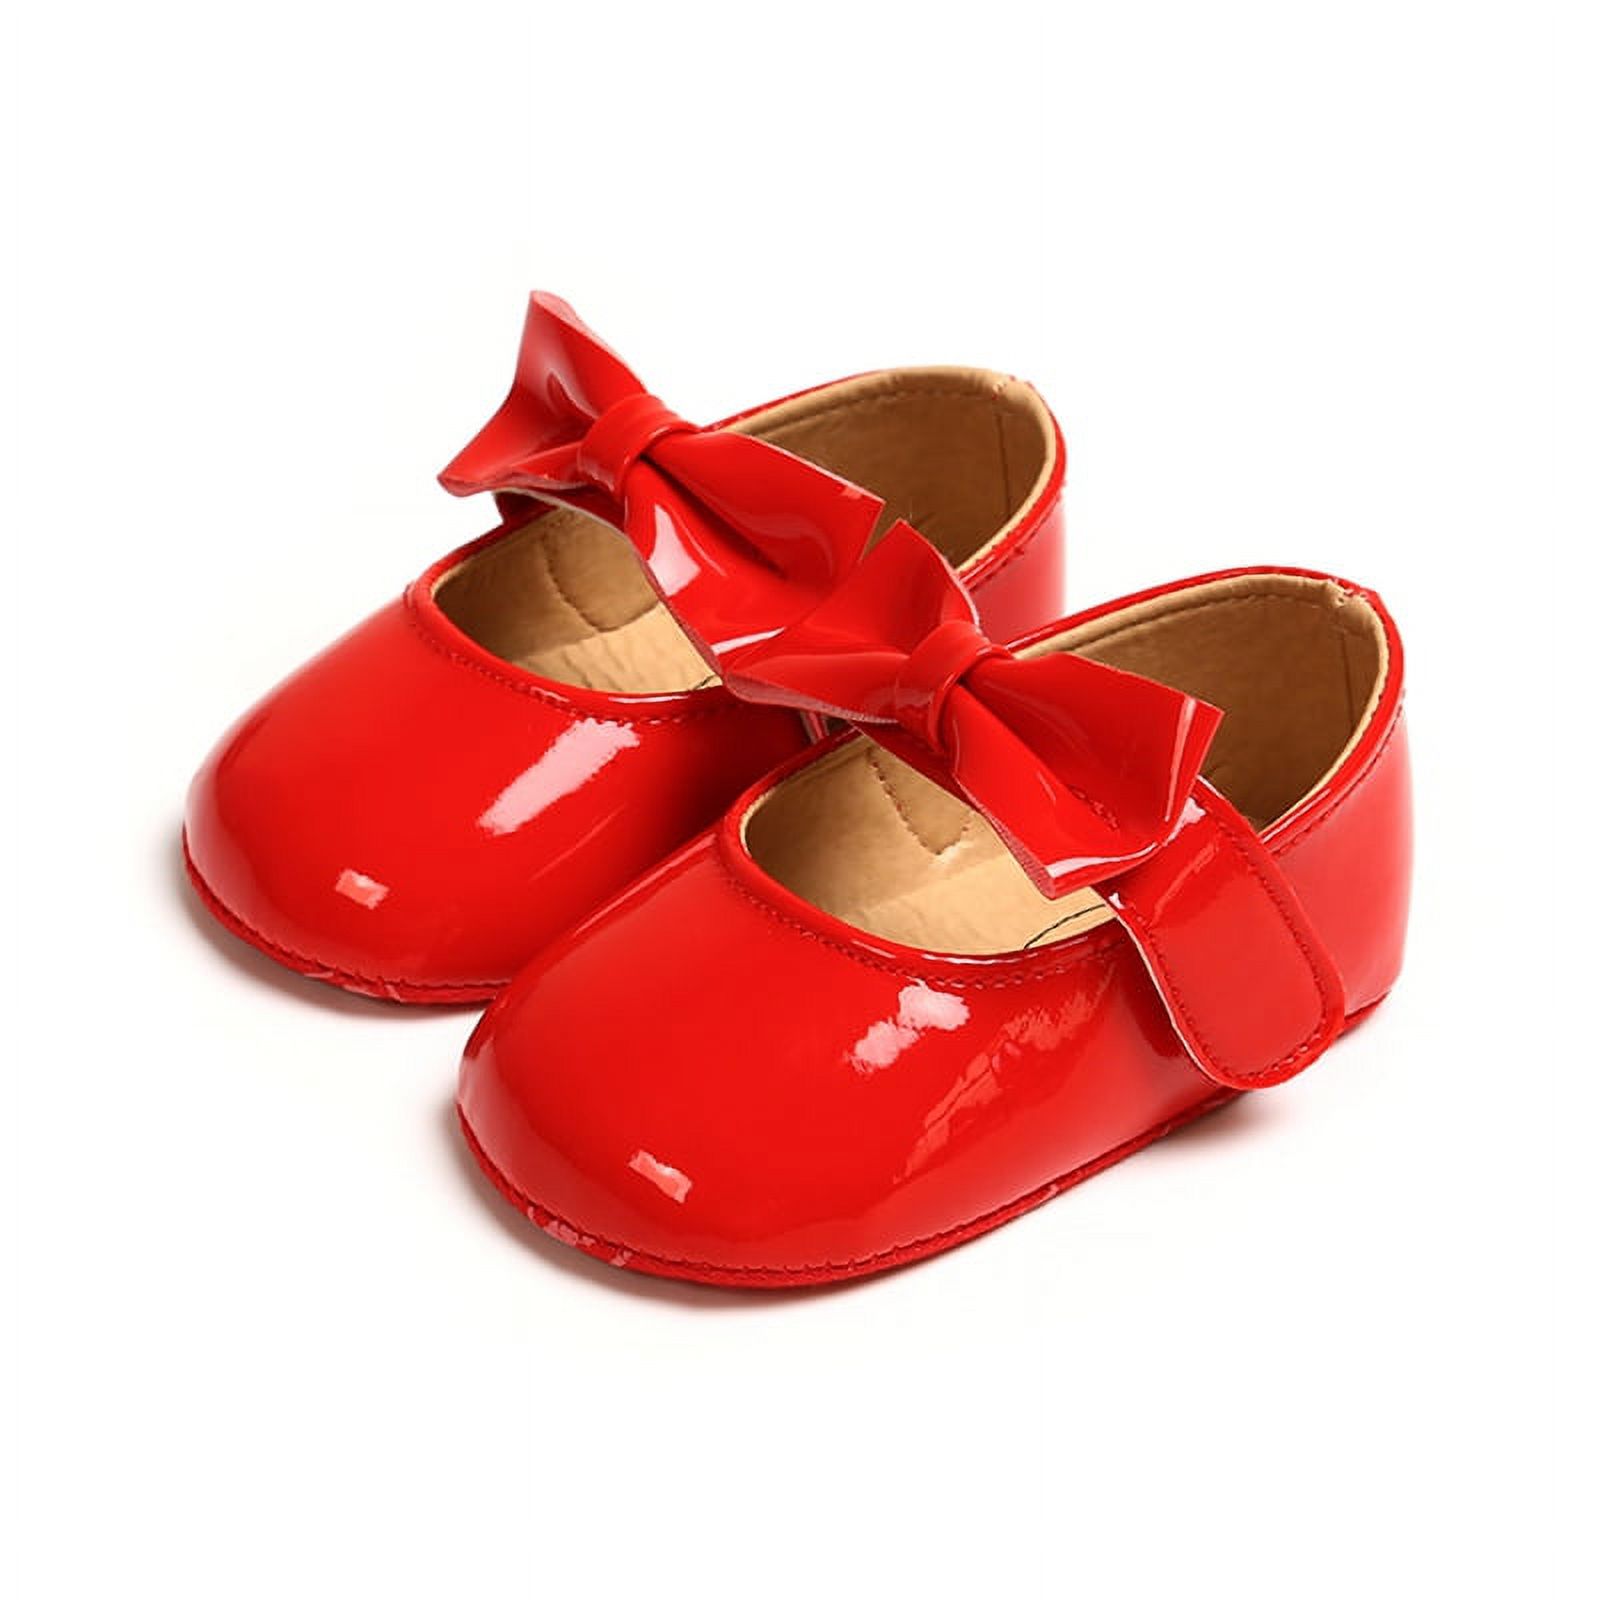 Maxcozy Infant Toddler Baby Girl's Soft Sole Anti-Slip Casual Shoes PU Leather Bowknot Princess Shoes - image 1 of 8